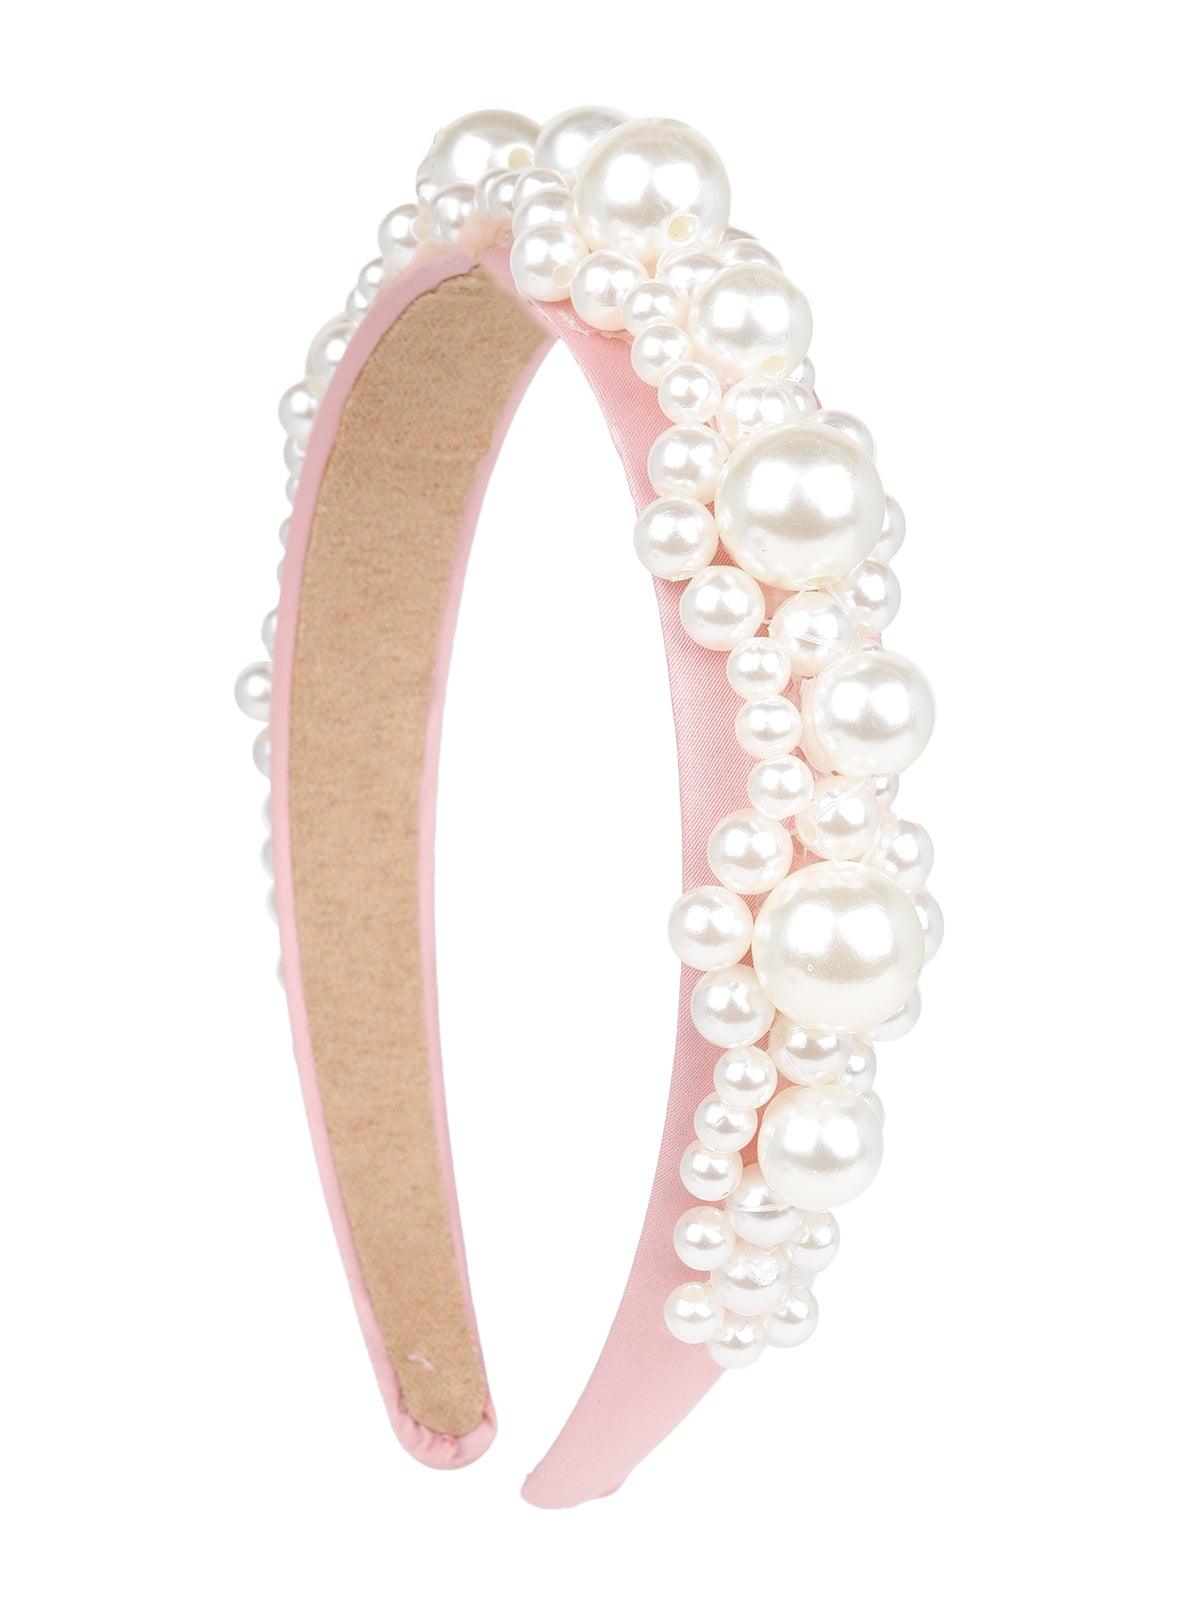 Chic Baby Pink Pearl Hairband - Odette